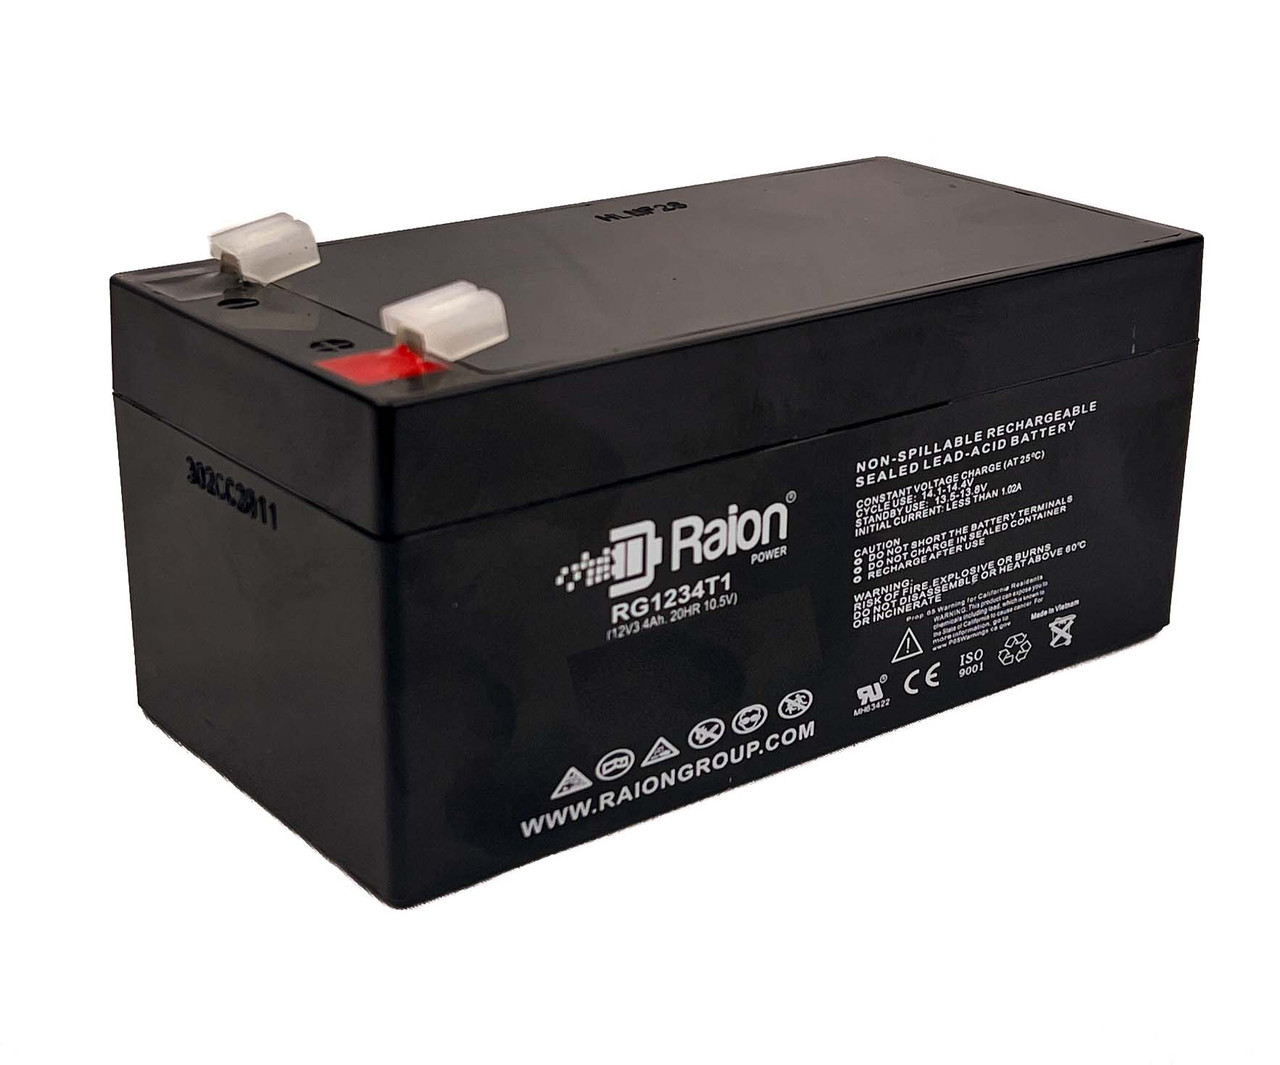 Raion Power 12V 3.4Ah Non-Spillable Replacement Battery for GS Portalac PE12V3AF1